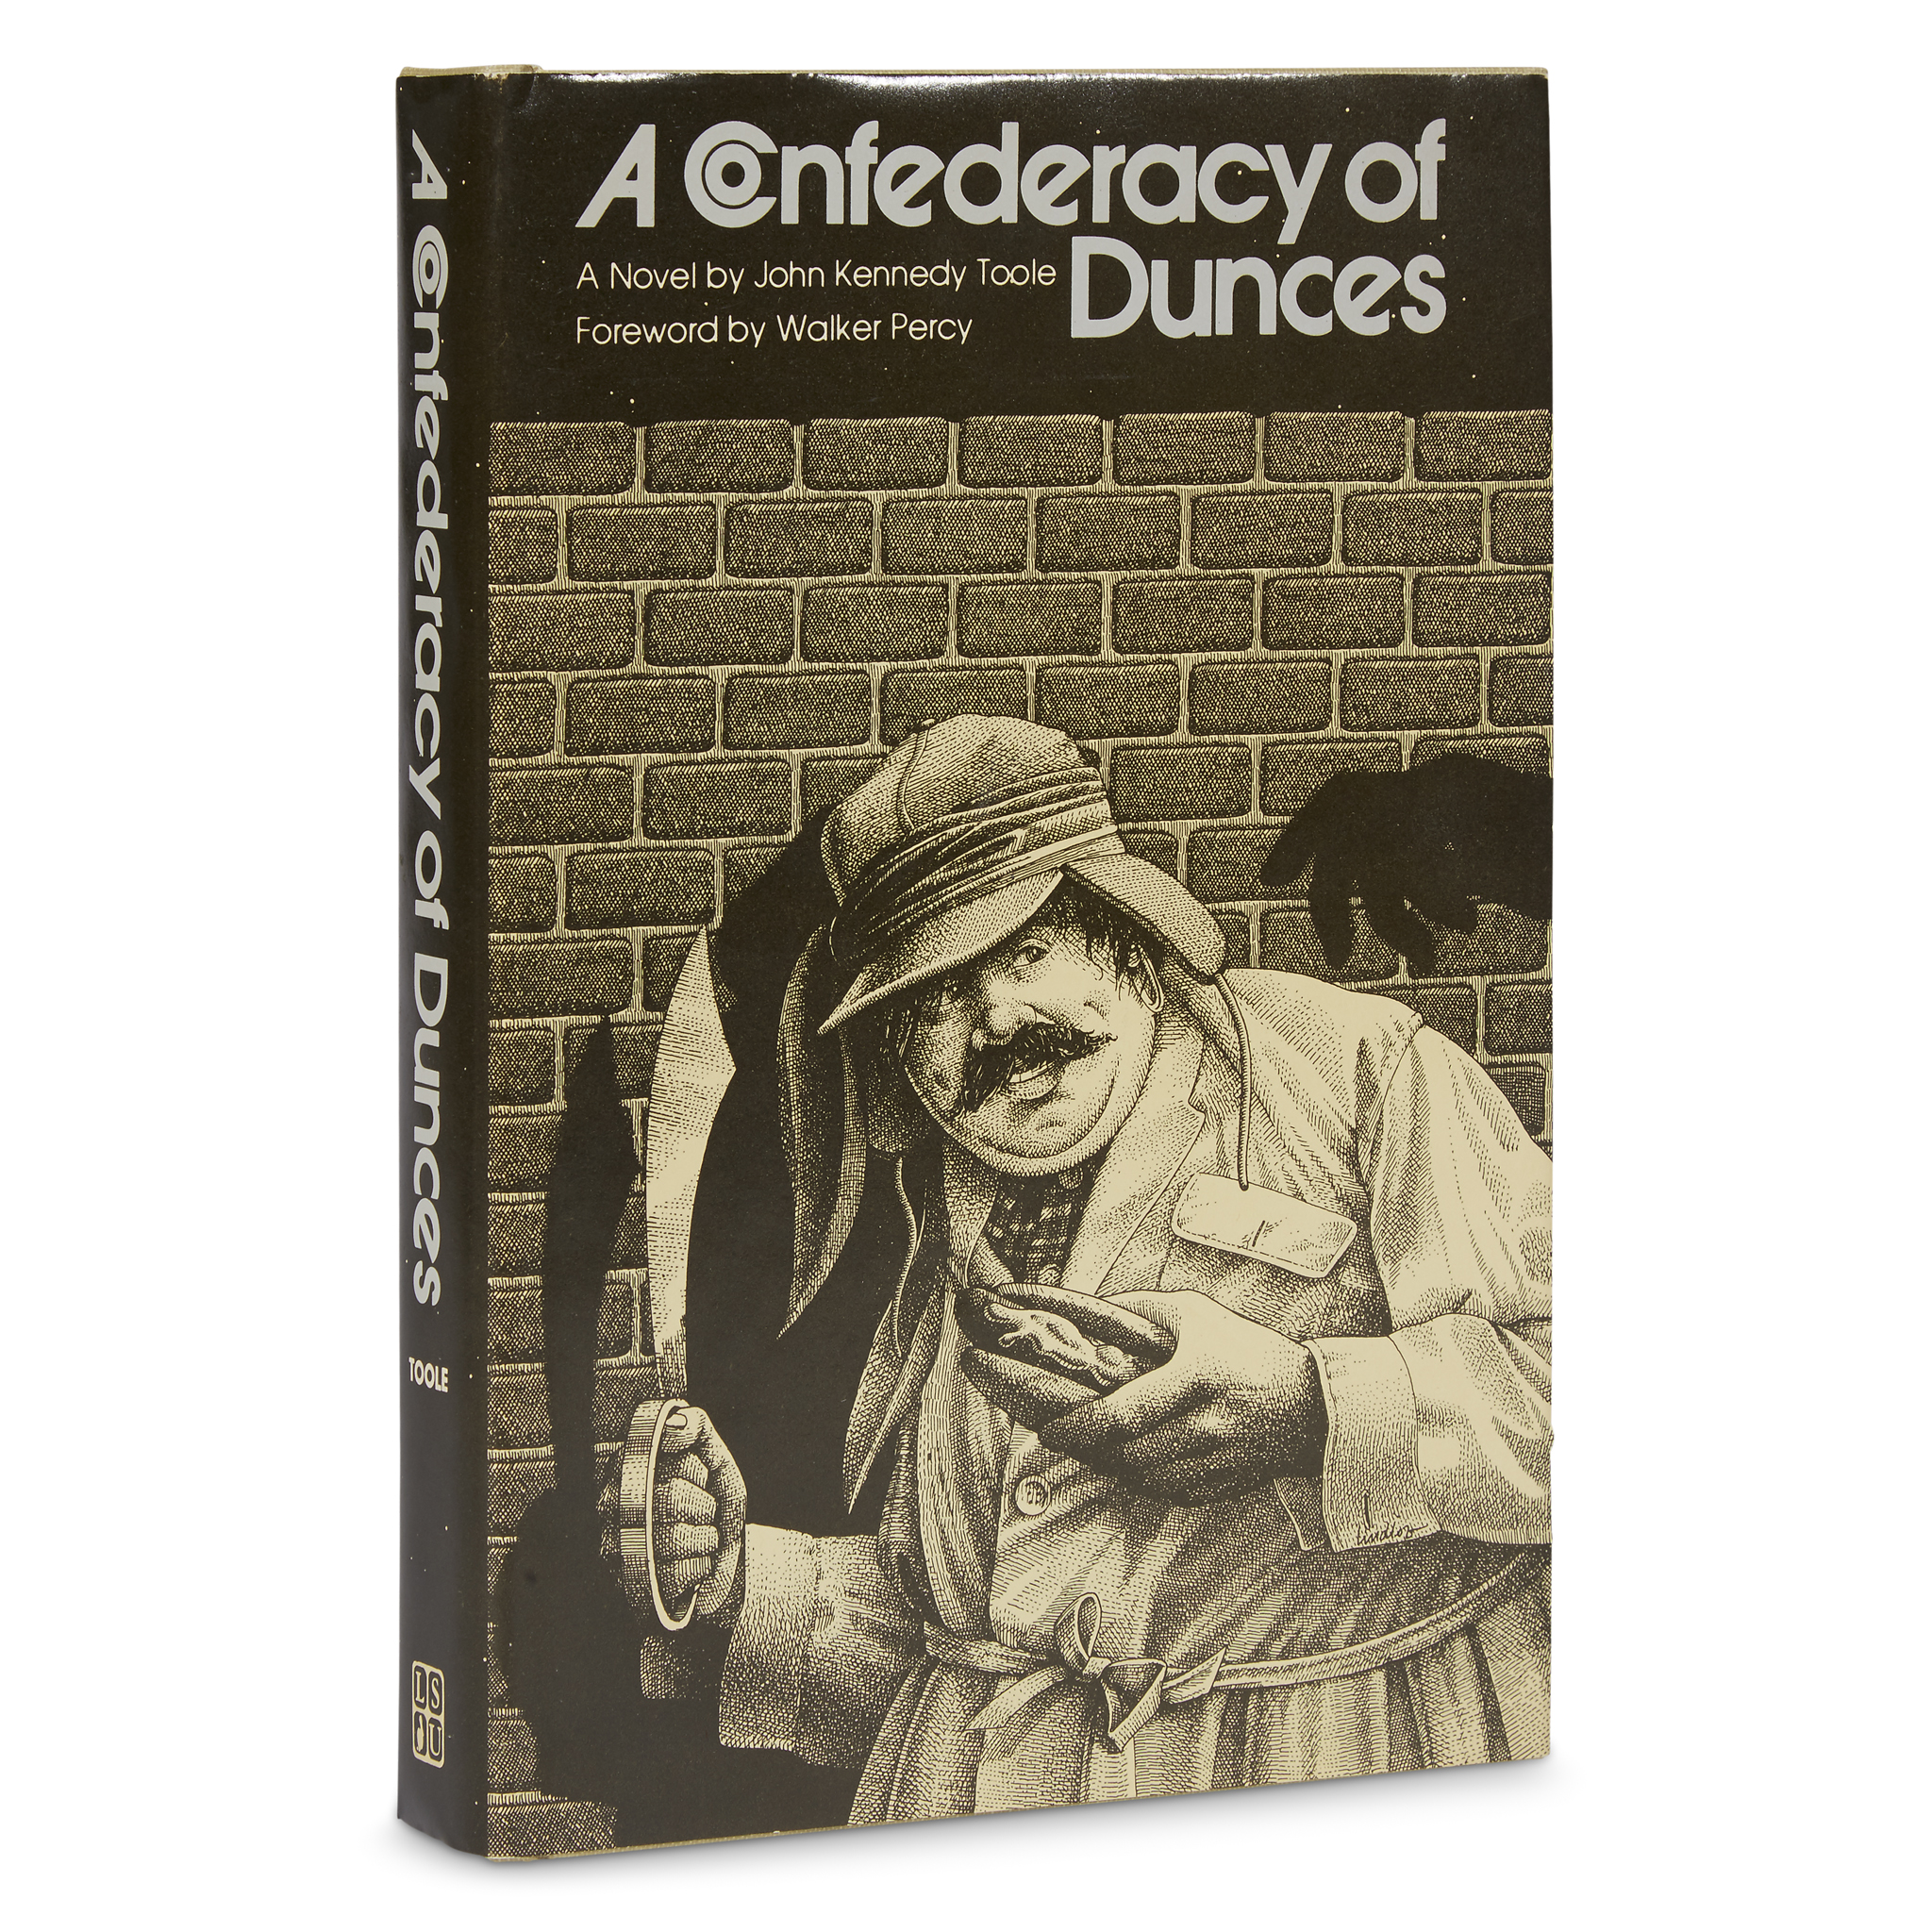 A 1980 first edition copy of A Confederacy of Dunces by John Kennedy Toole, in its dust jacket.